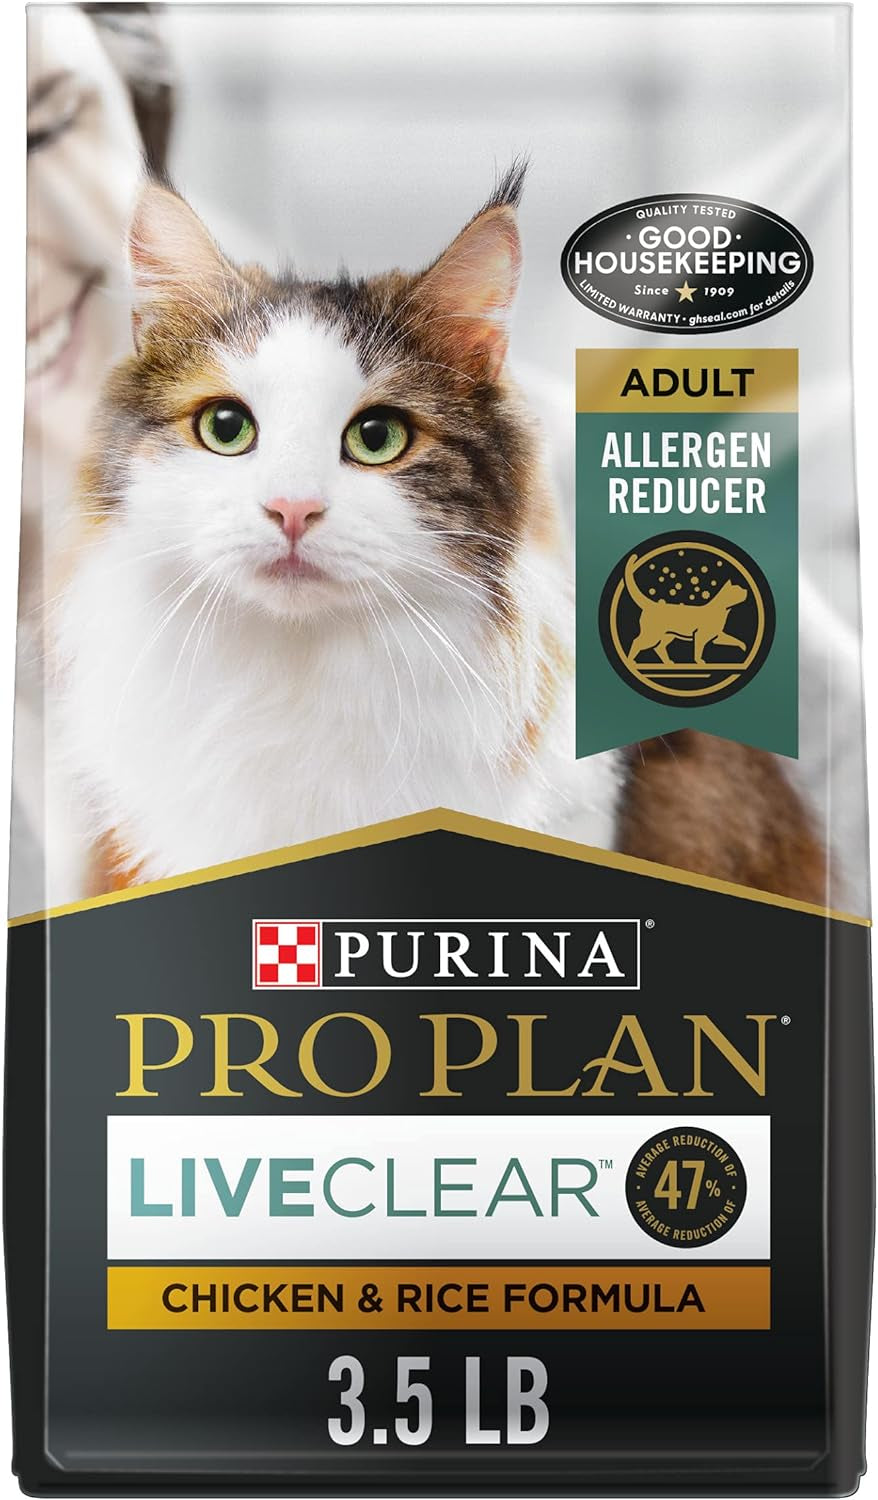 Allergen Reducing, High Protein Cat Food, LIVECLEAR Chicken and Rice Formula - 3.5 Lb. Bag